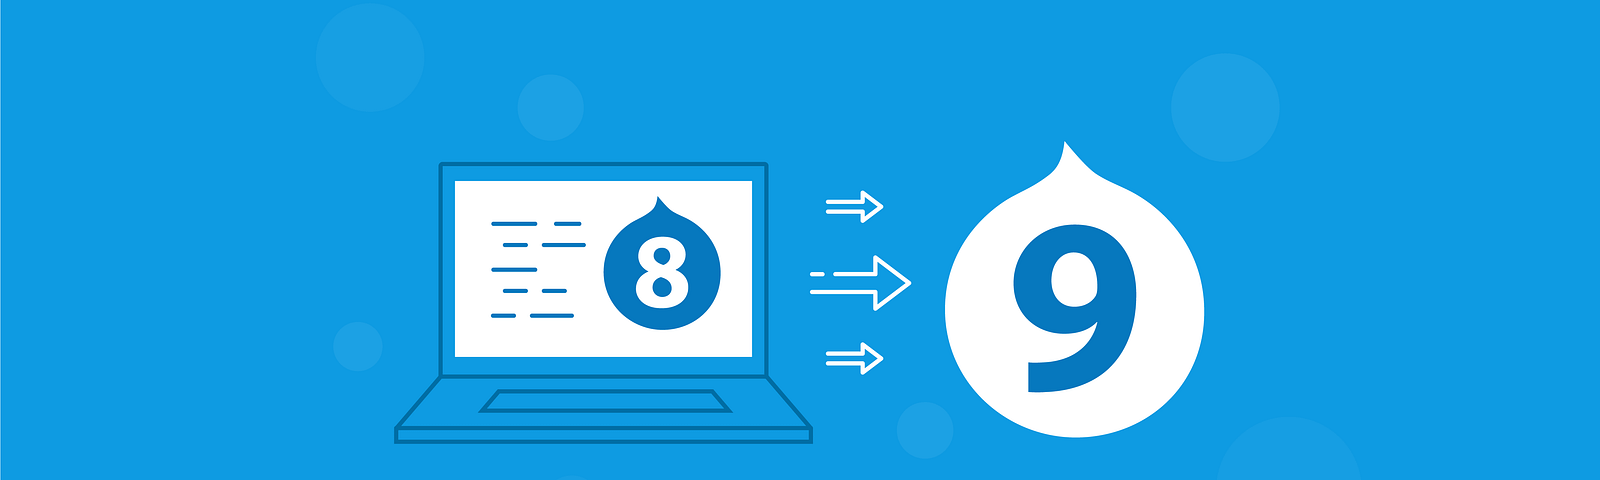 The Drupal 8 icon on a screen pointing to the Drupal 9 icon